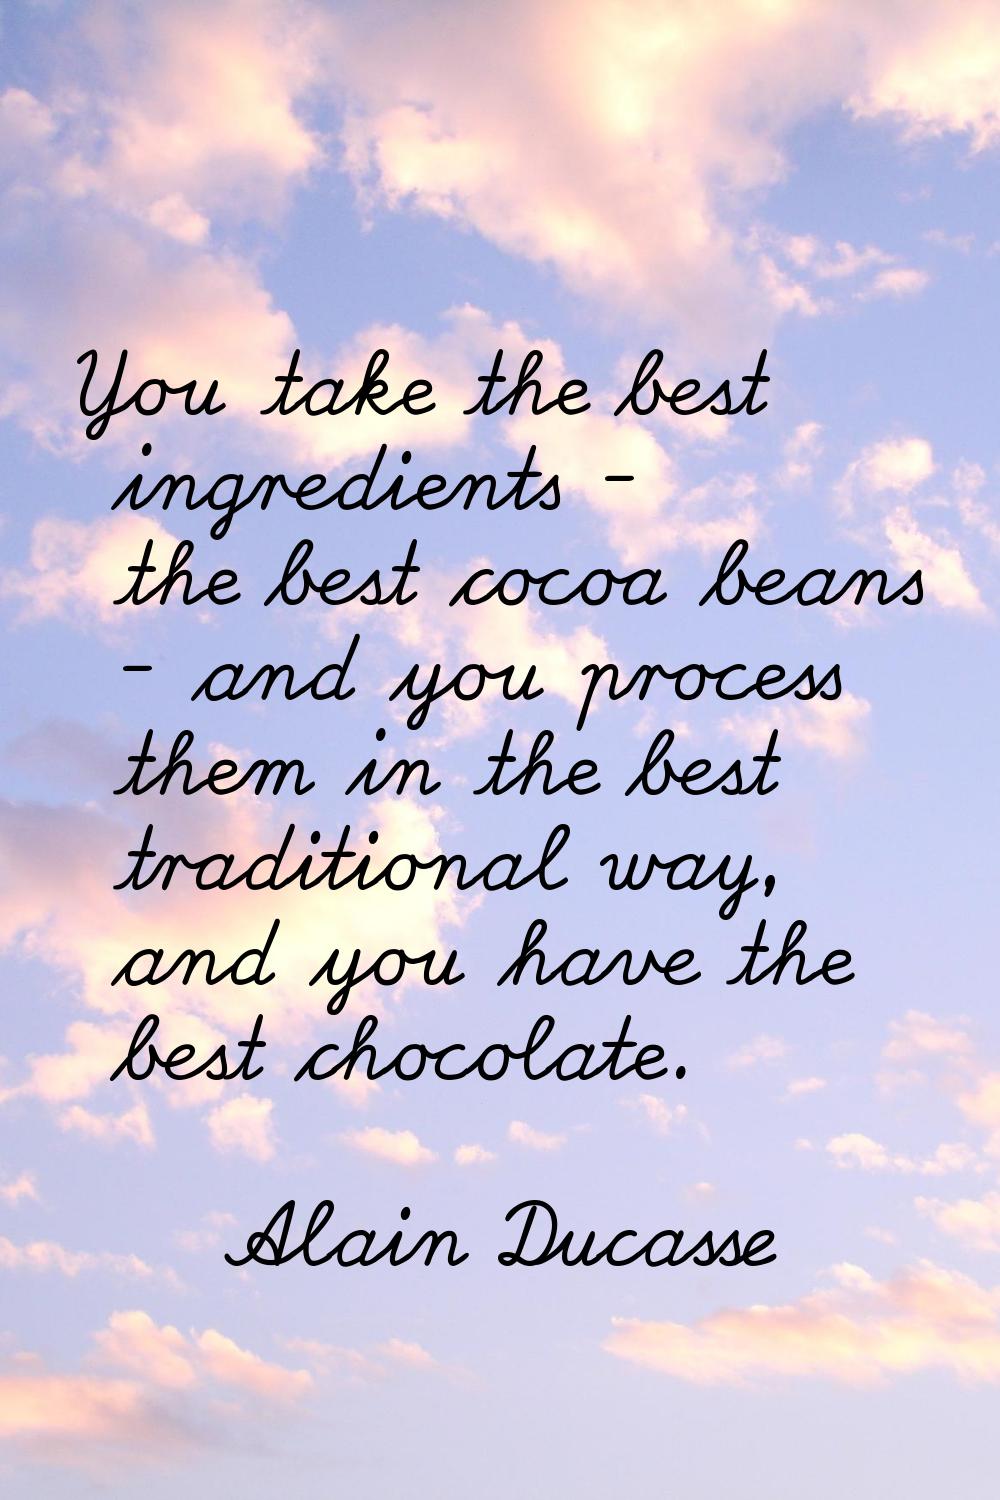 You take the best ingredients - the best cocoa beans - and you process them in the best traditional